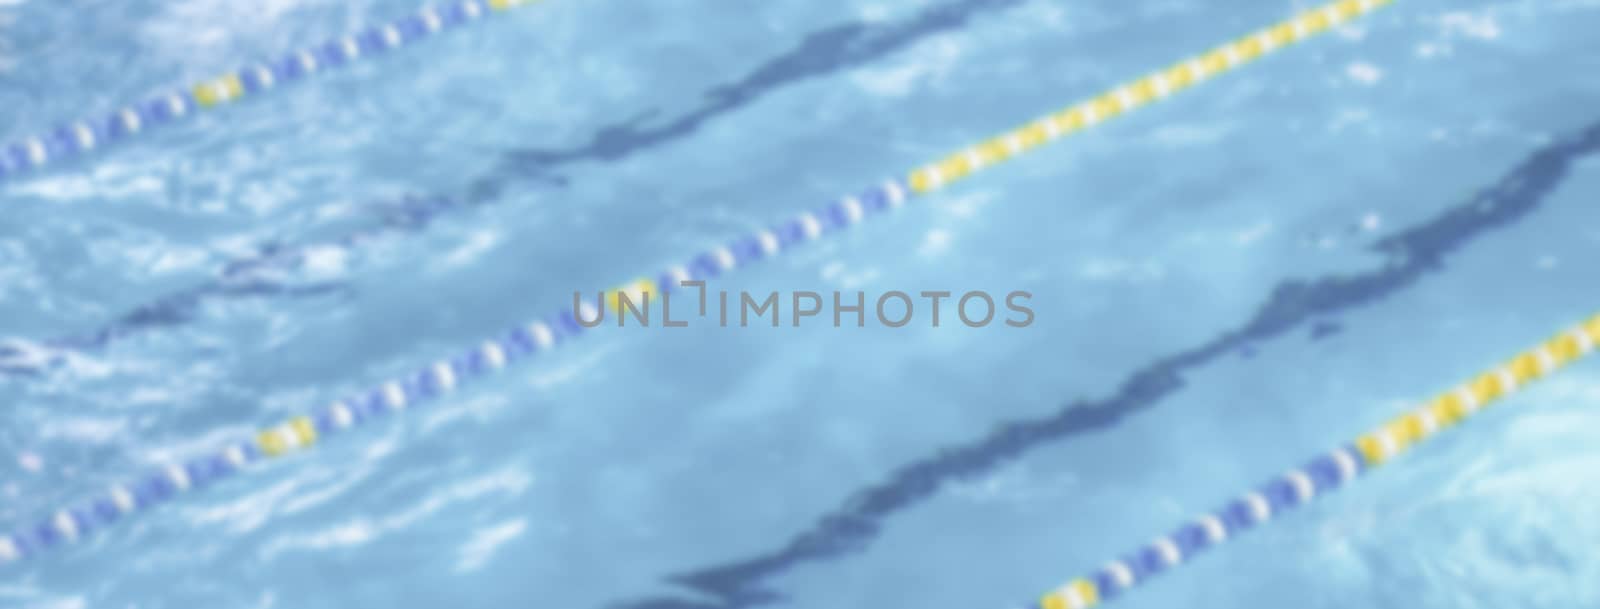 Defocused background with aerial view of a swimming pool with di by marcorubino